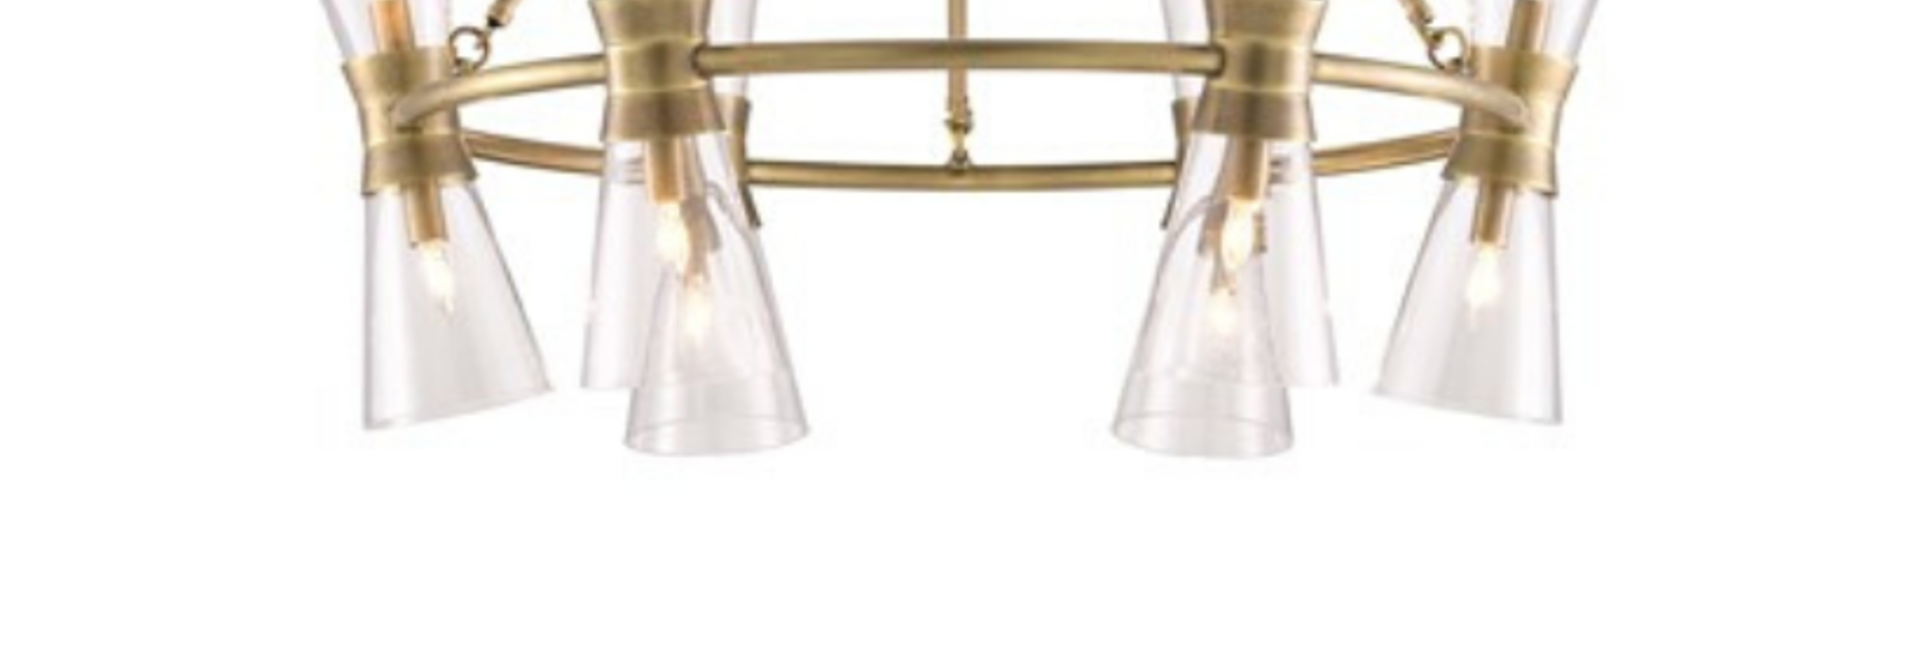 Quennell | The Chandelier Collection, 36.5 Inch x 36.5 Inch x 31.25 Inch